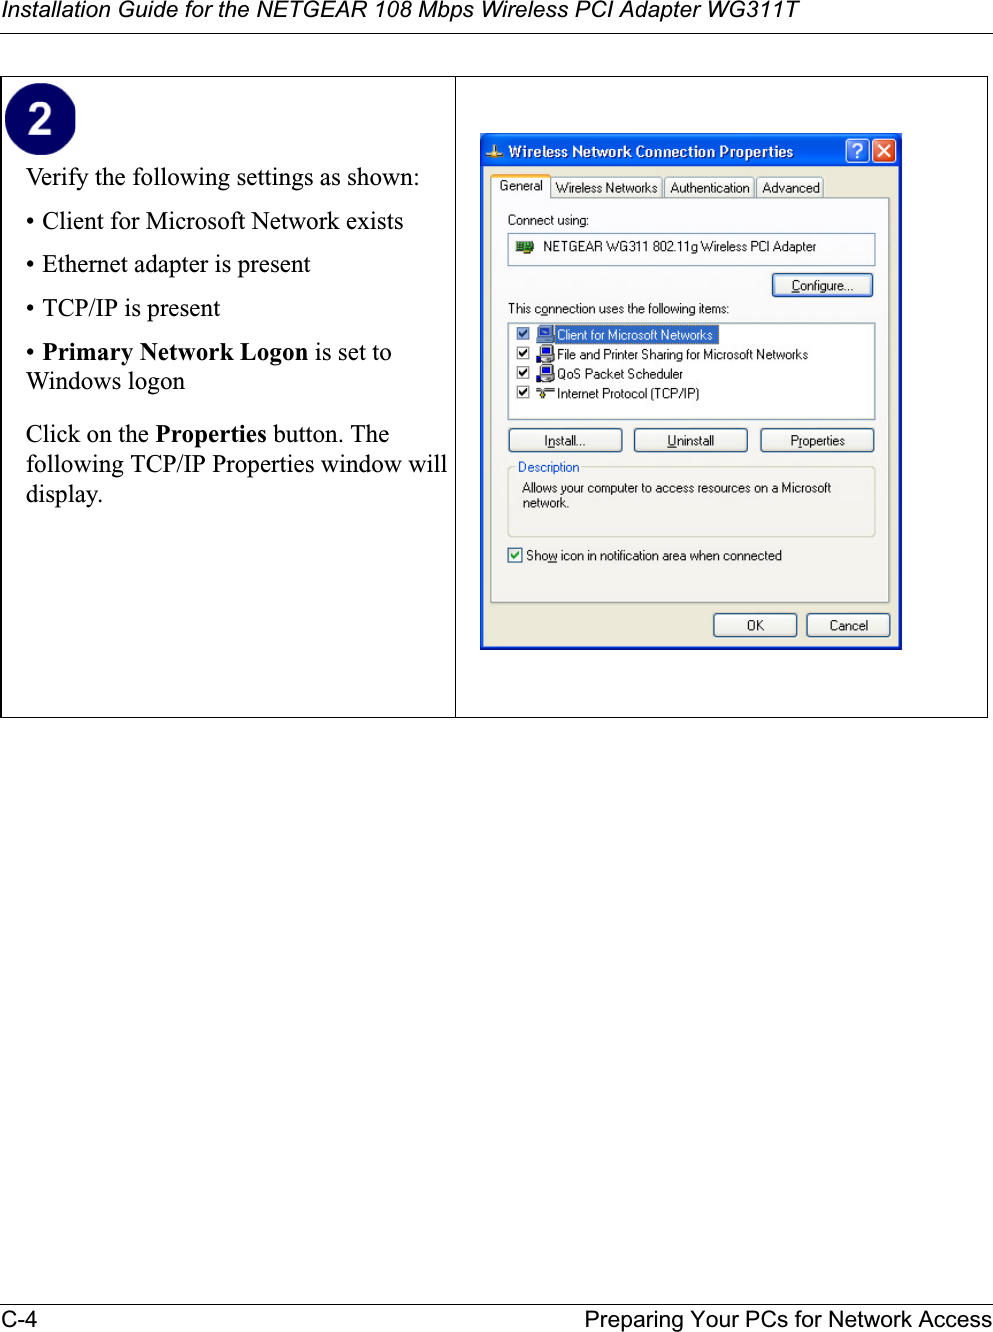 Installation Guide for the NETGEAR 108 Mbps Wireless PCI Adapter WG311TC-4 Preparing Your PCs for Network AccessVerify the following settings as shown: • Client for Microsoft Network exists• Ethernet adapter is present• TCP/IP is present•Primary Network Logon is set to Windows logonClick on the Properties button. The following TCP/IP Properties window will display.